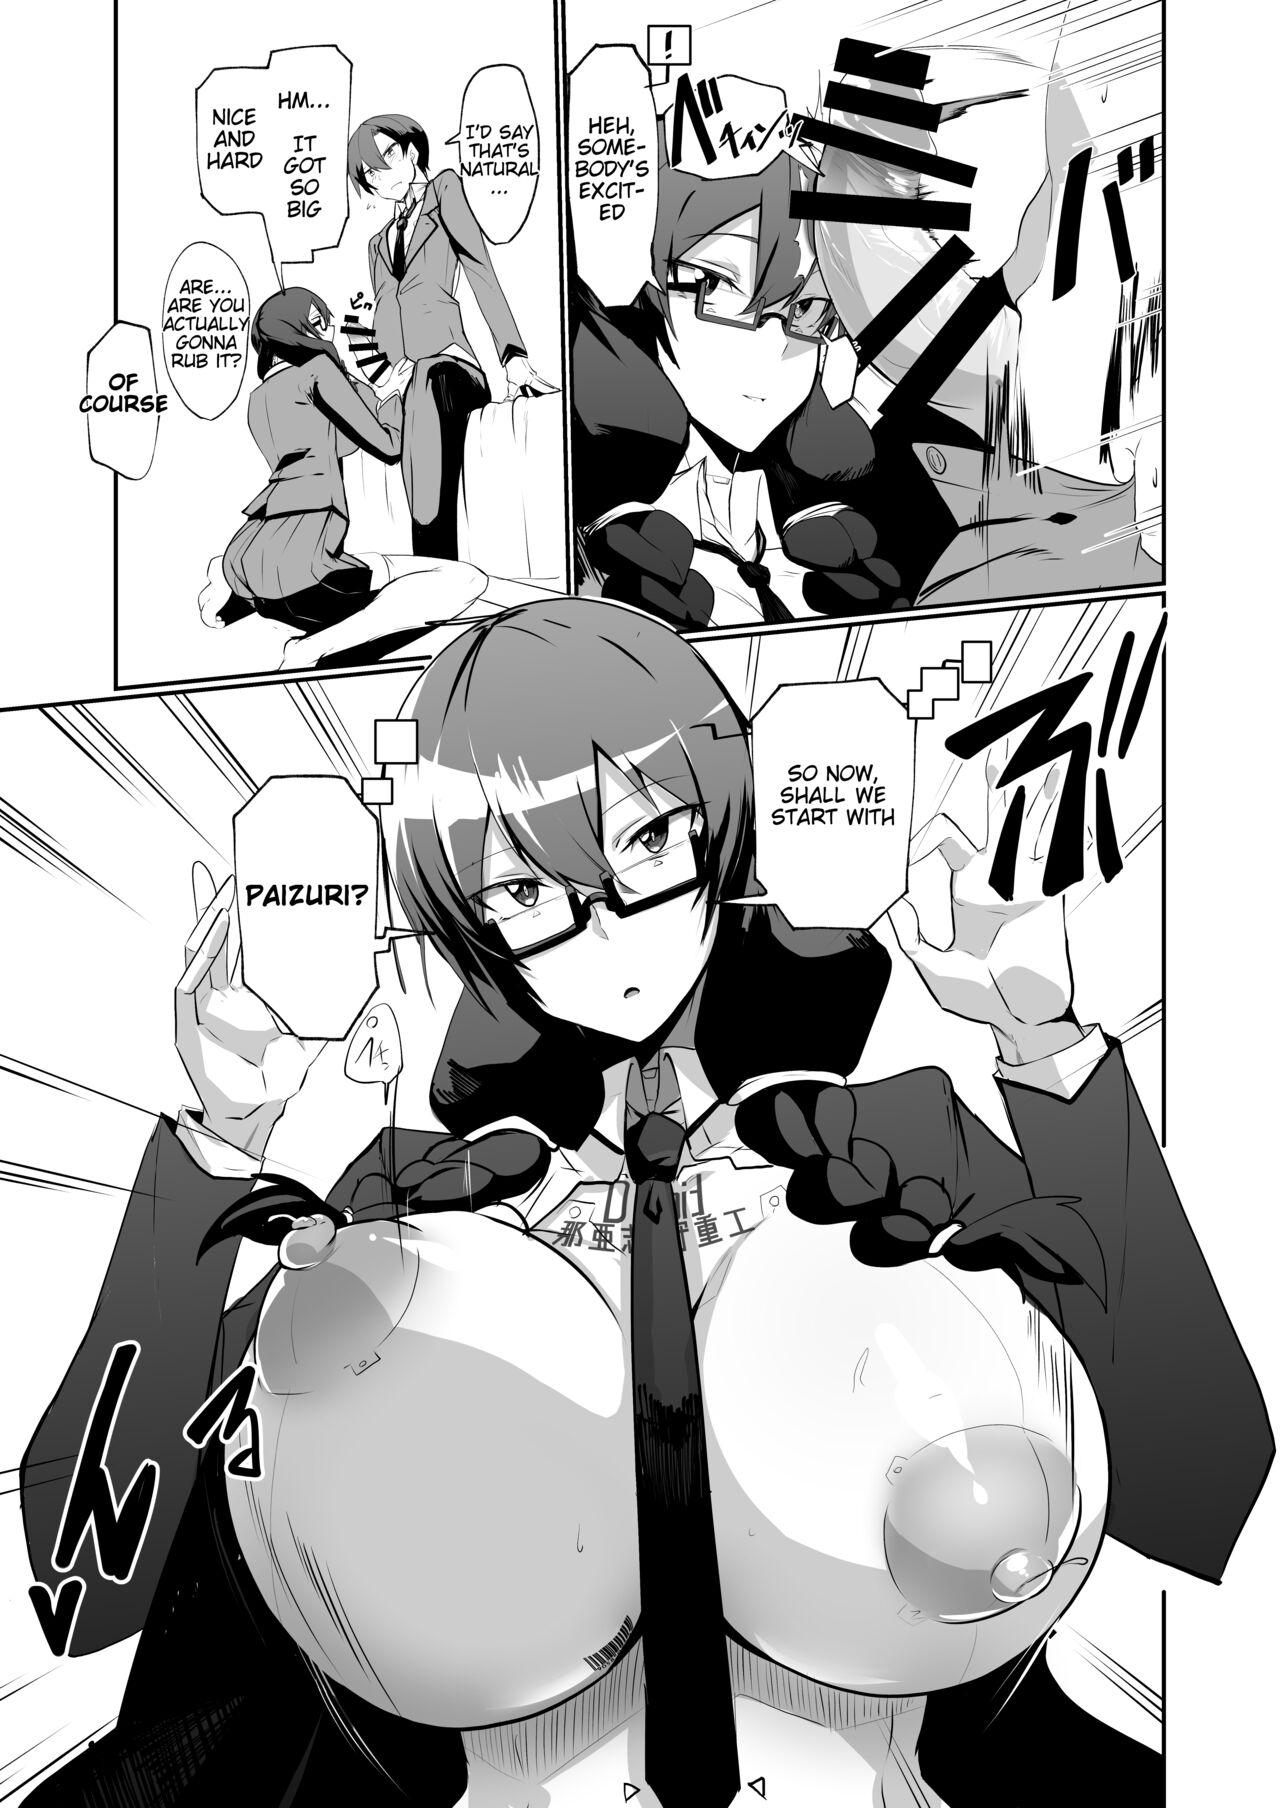 Phat The Manga about being Lovey-Dovey with your Android Childhood Friend - Original Grandma - Page 8